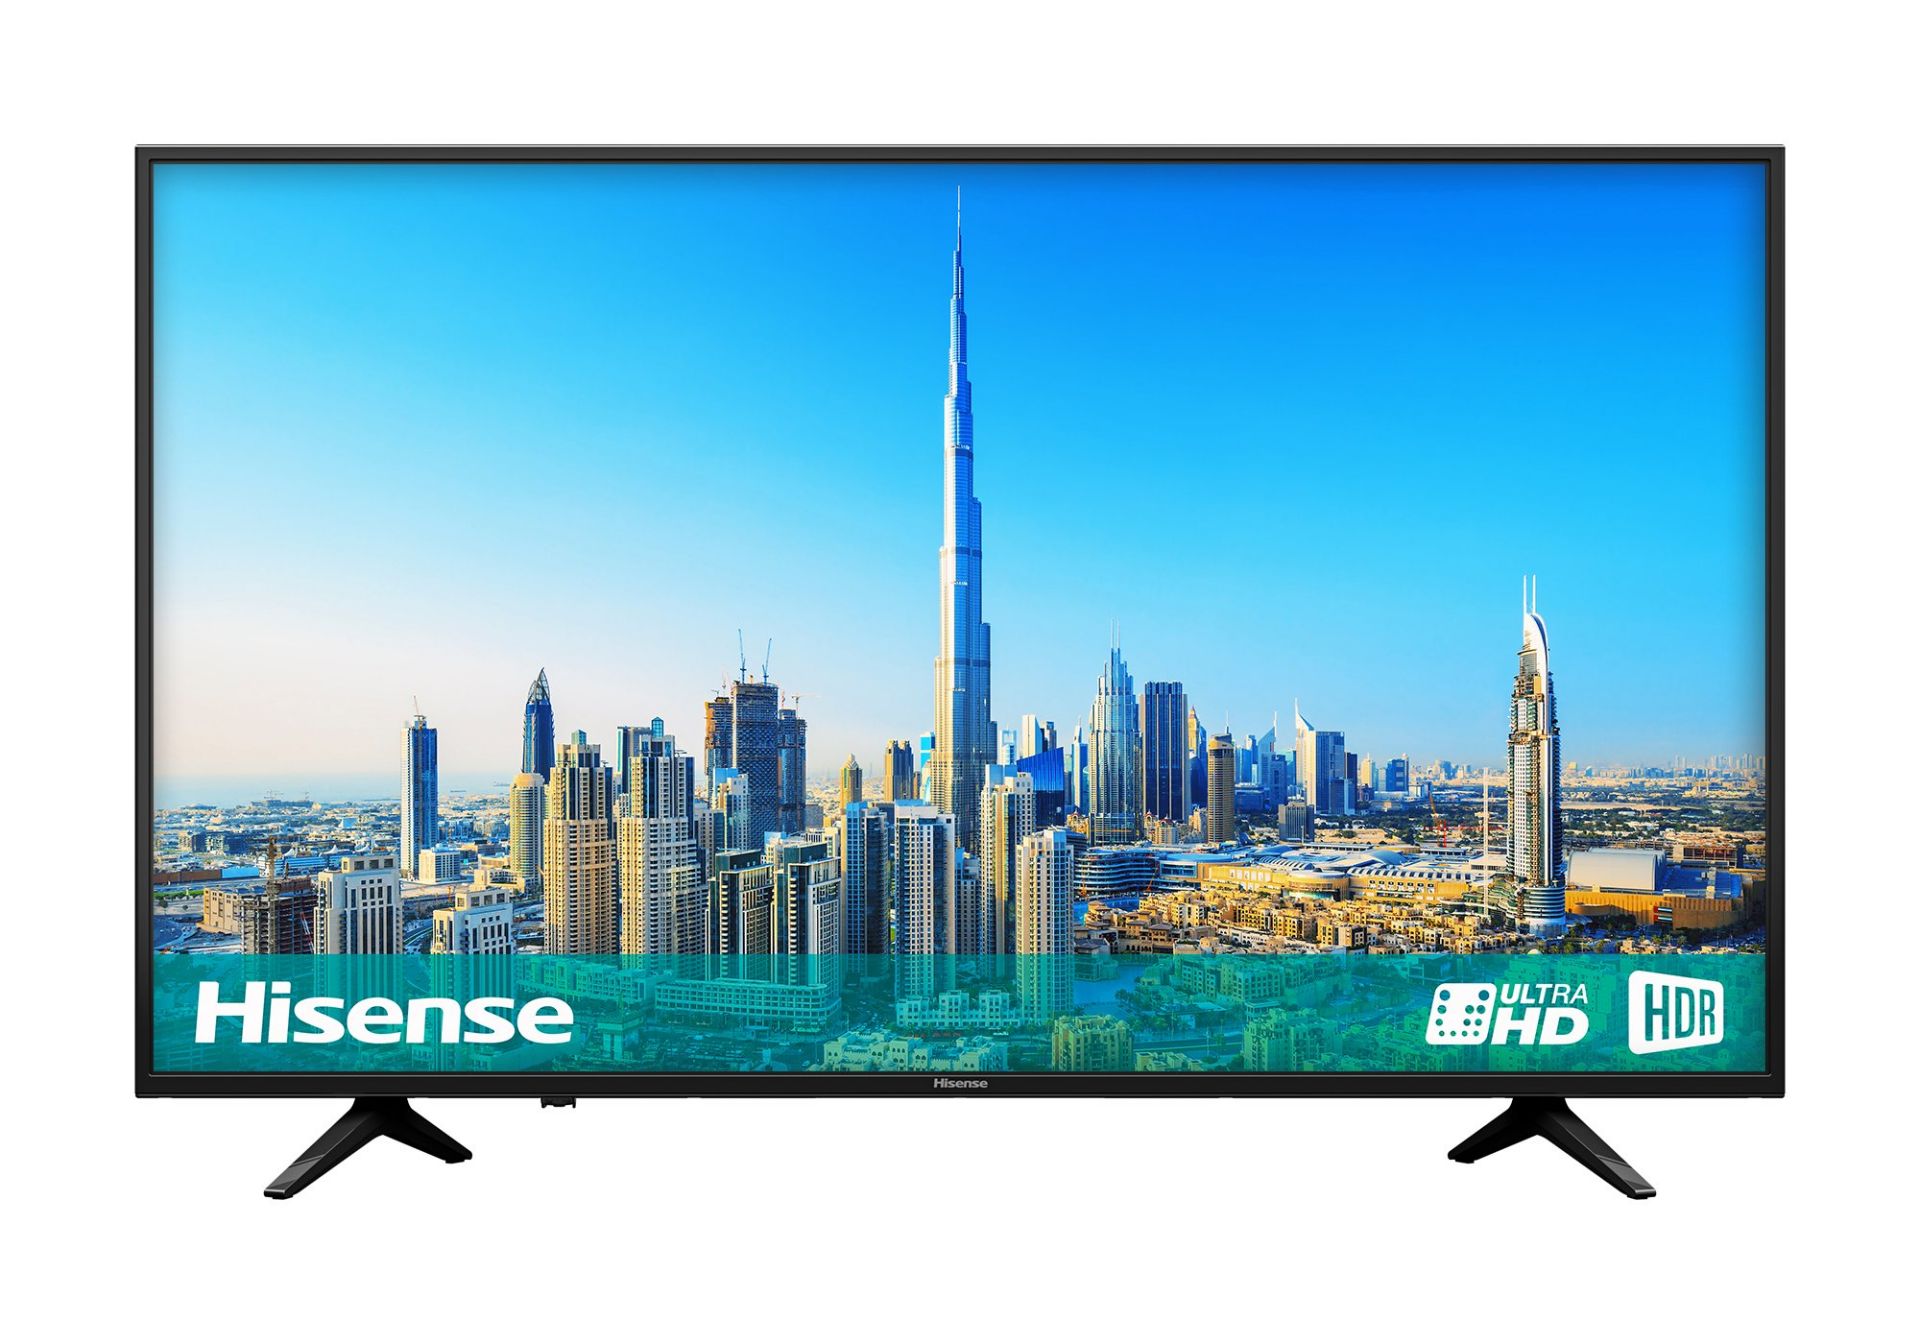 HISENSE 43-INCH 4K ULTRA HD HDR SMART TV C/W POWER CABLE & REMOTE, IN PERFECT WORKING ORDER *NO VAT*